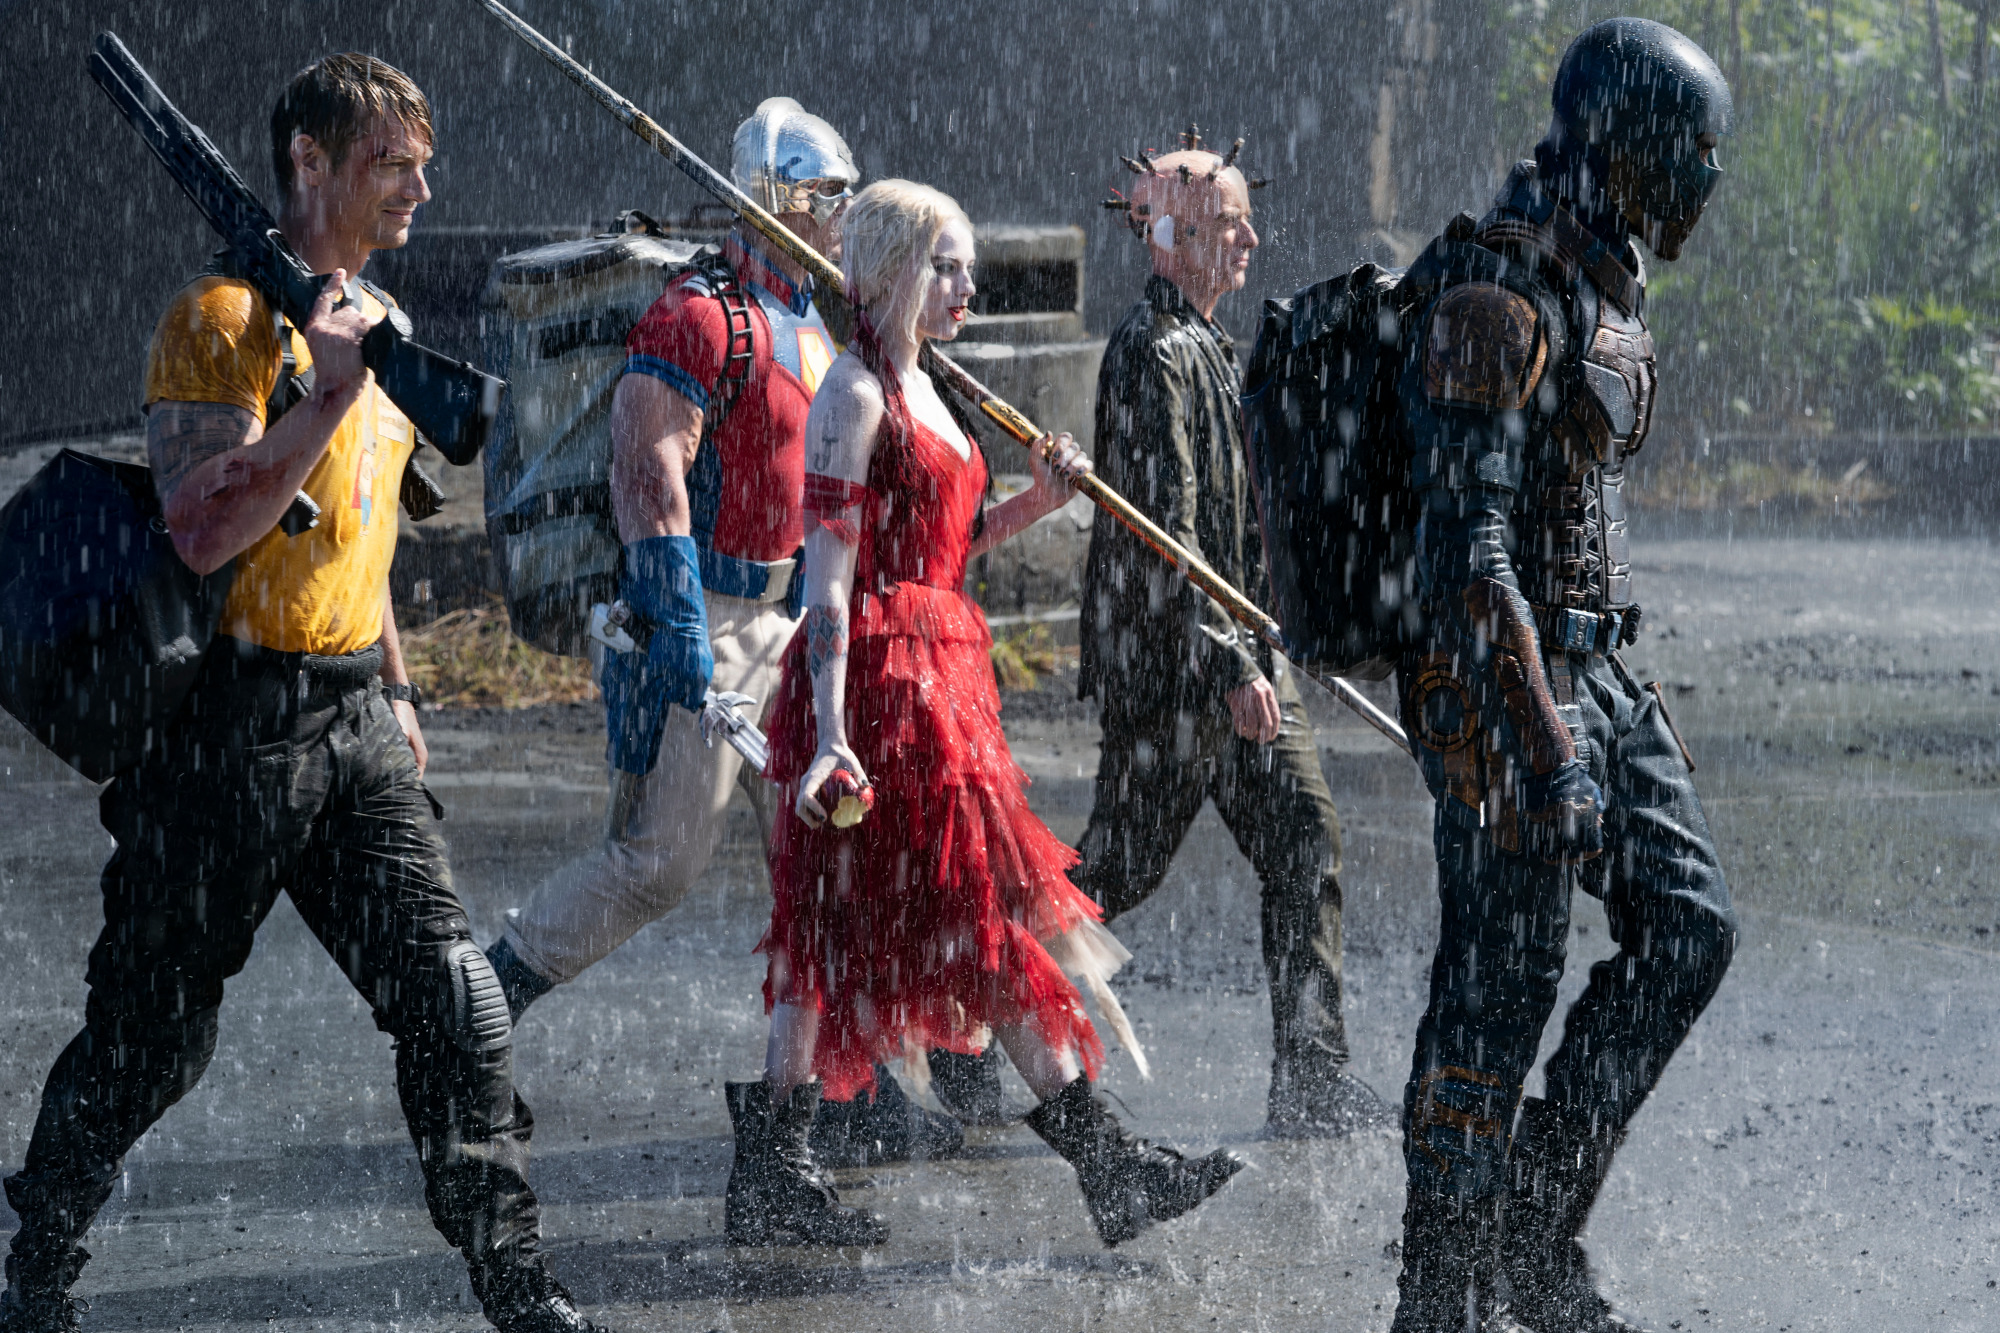 Joel Kinnaman as Rick Flag, John Cena as Peacemaker, Margot Robbie as Harley Quinn, Peter Capaldi as The Thinker and Idris Elba as Bloodsport in ‘The Suicide Squad.’ The group walks together in the rain, headed somewhere to the right of screen. Bloodsport leads them wearing all black and a black helmet, and Harley Quinn wears a ruffled red dress and combat boots. The film is streaming on HBO Max and available in theaters.